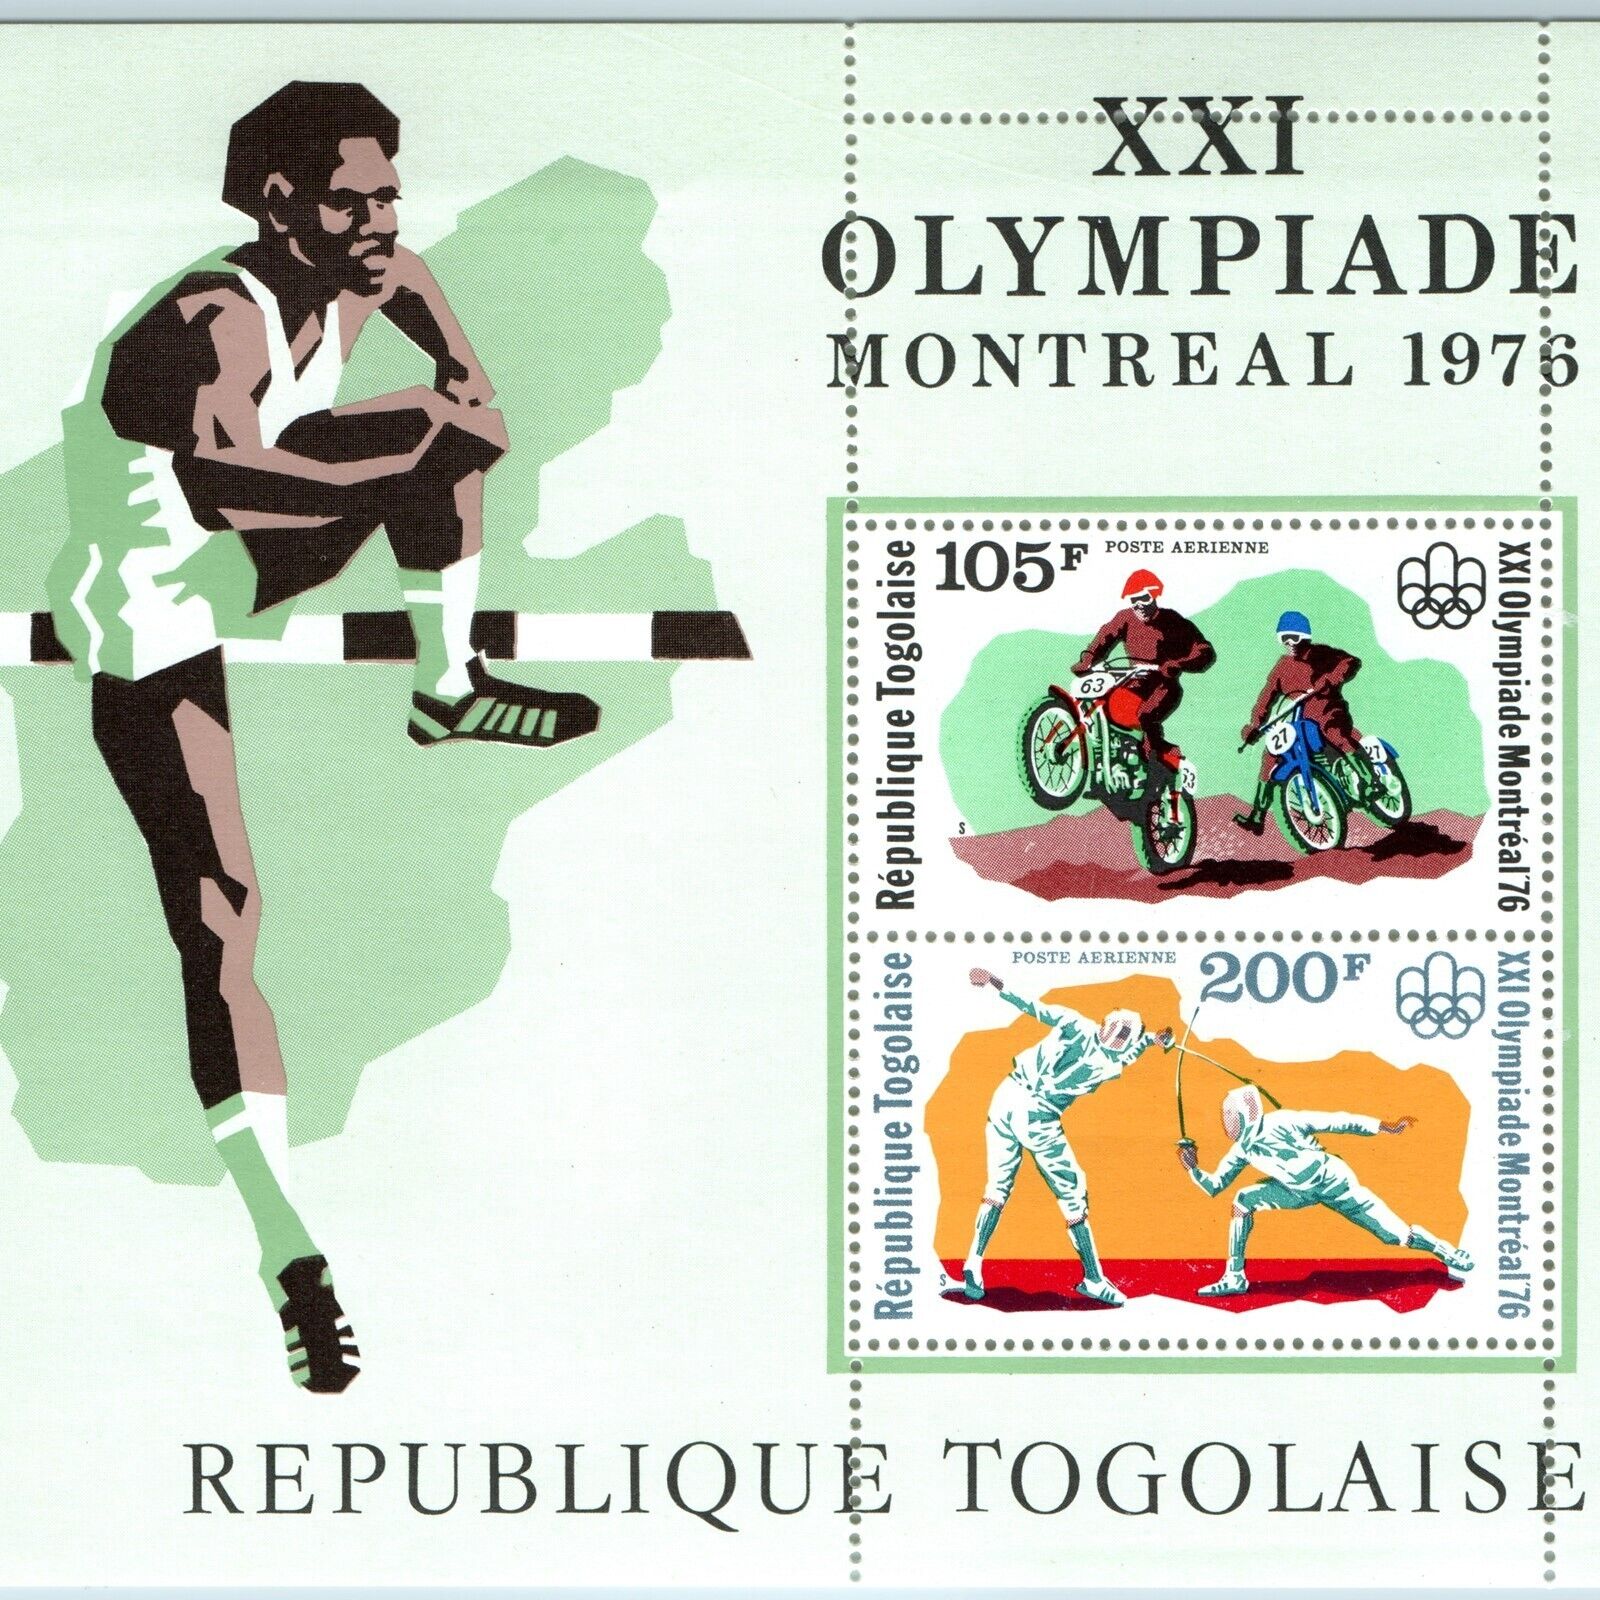 1976 Republique Togolaise Togo Stamp Block 1976 Montreal Olympics Motorcycle 7O